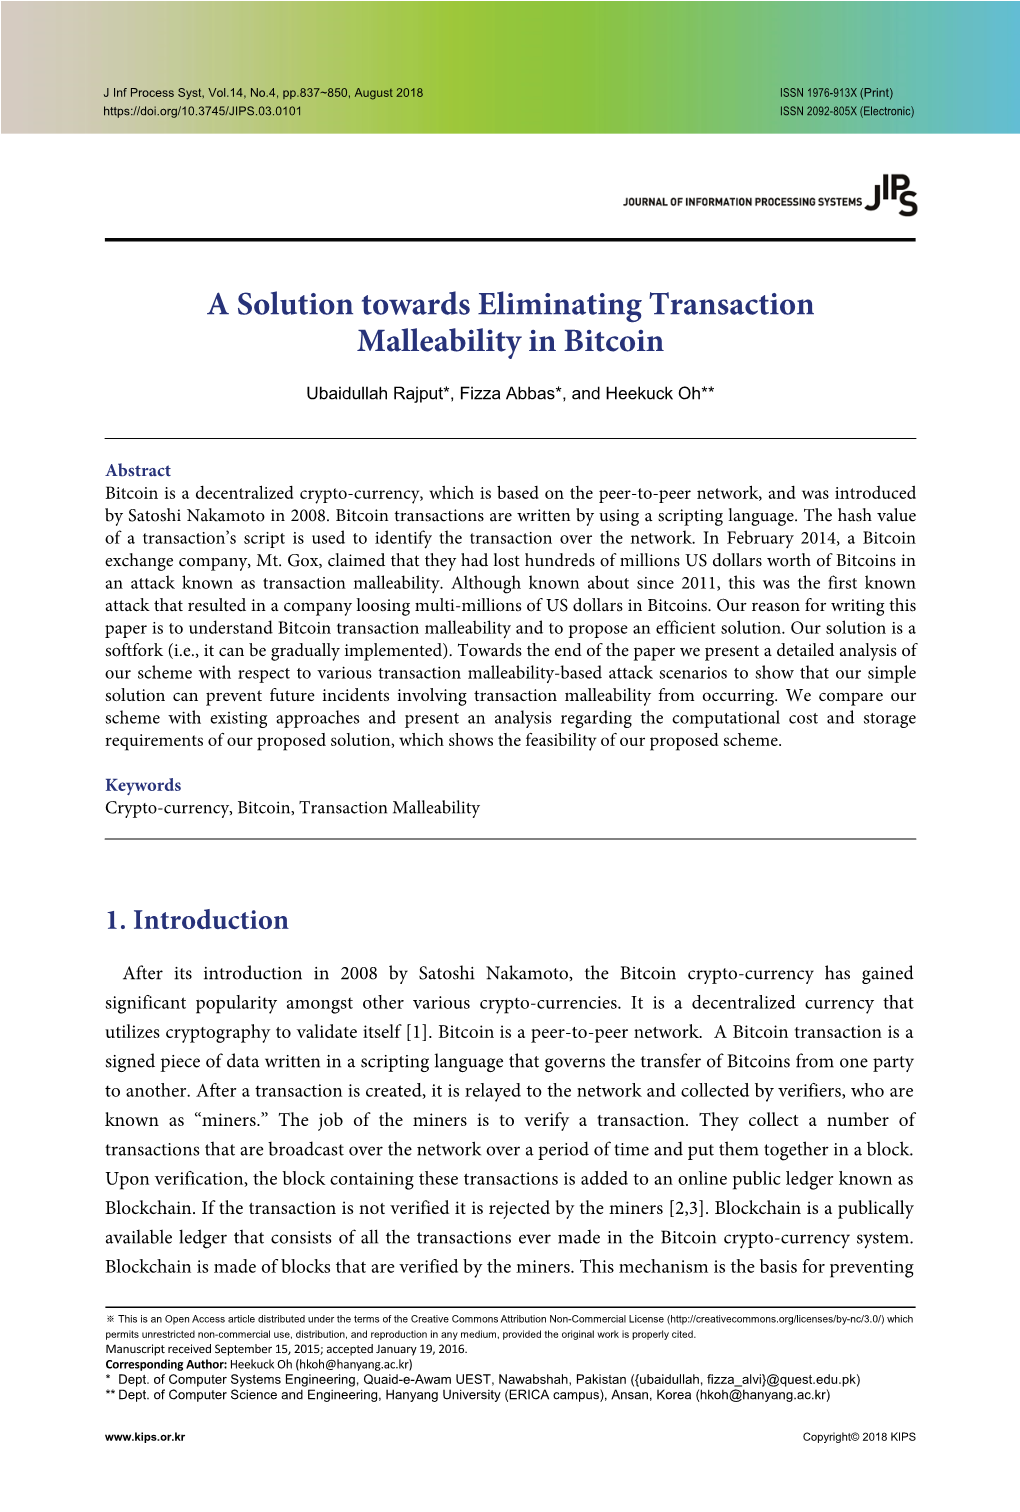 A Solution Towards Eliminating Transaction Malleability in Bitcoin